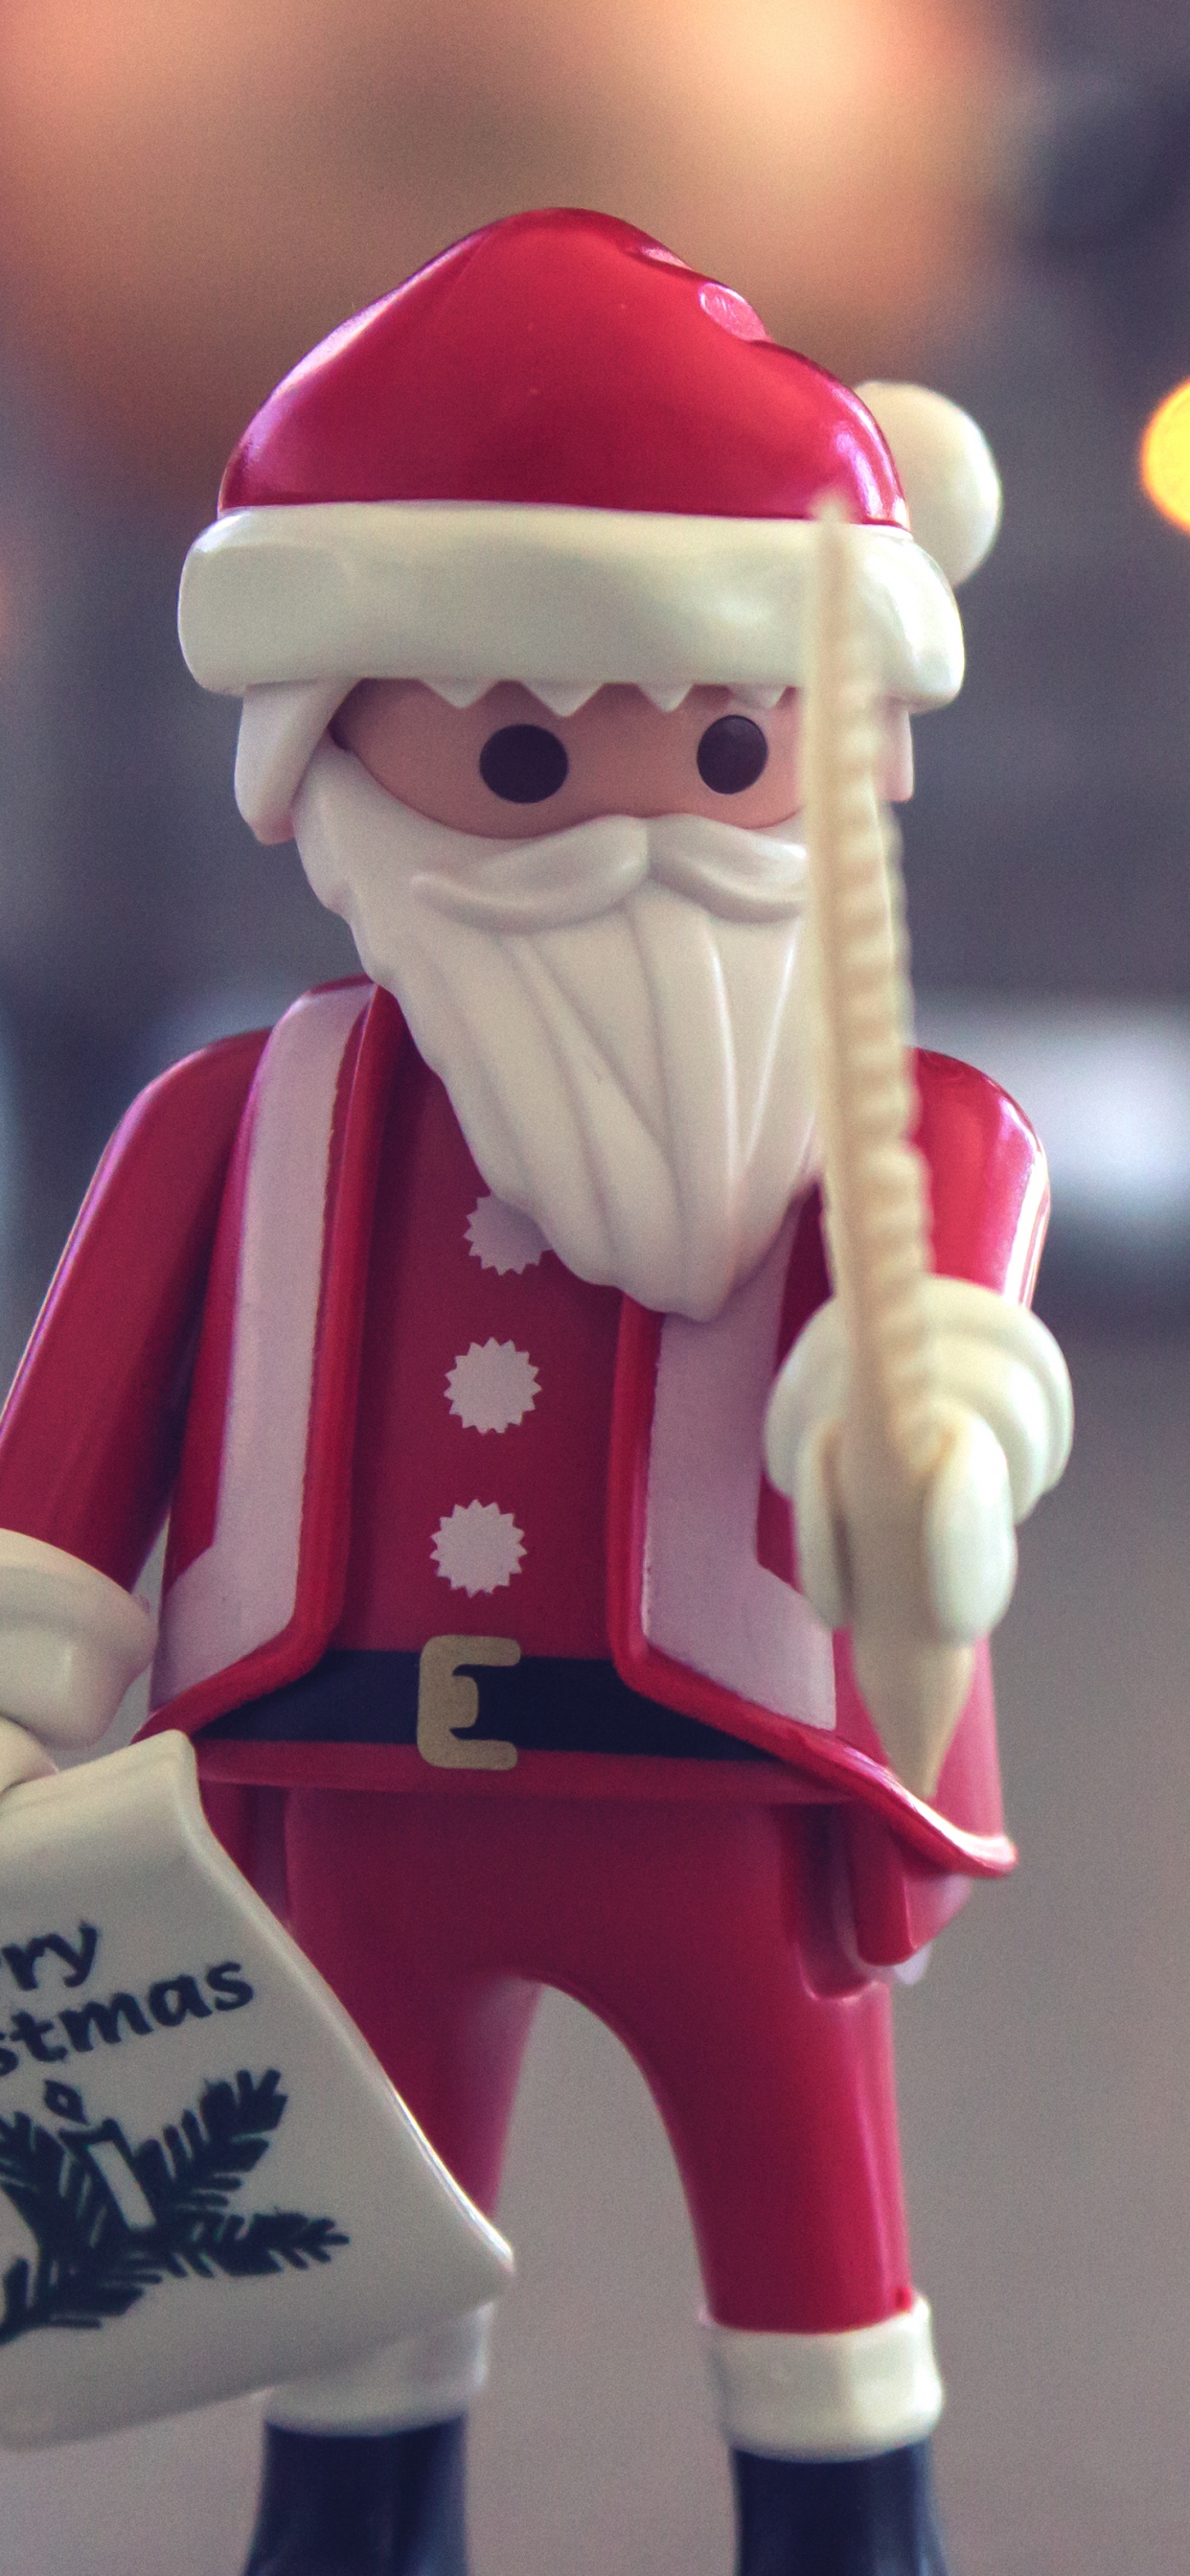 Santa Claus, Christmas Day, Figurine, Toy, Christmas. Wallpaper in 1242x2688 Resolution